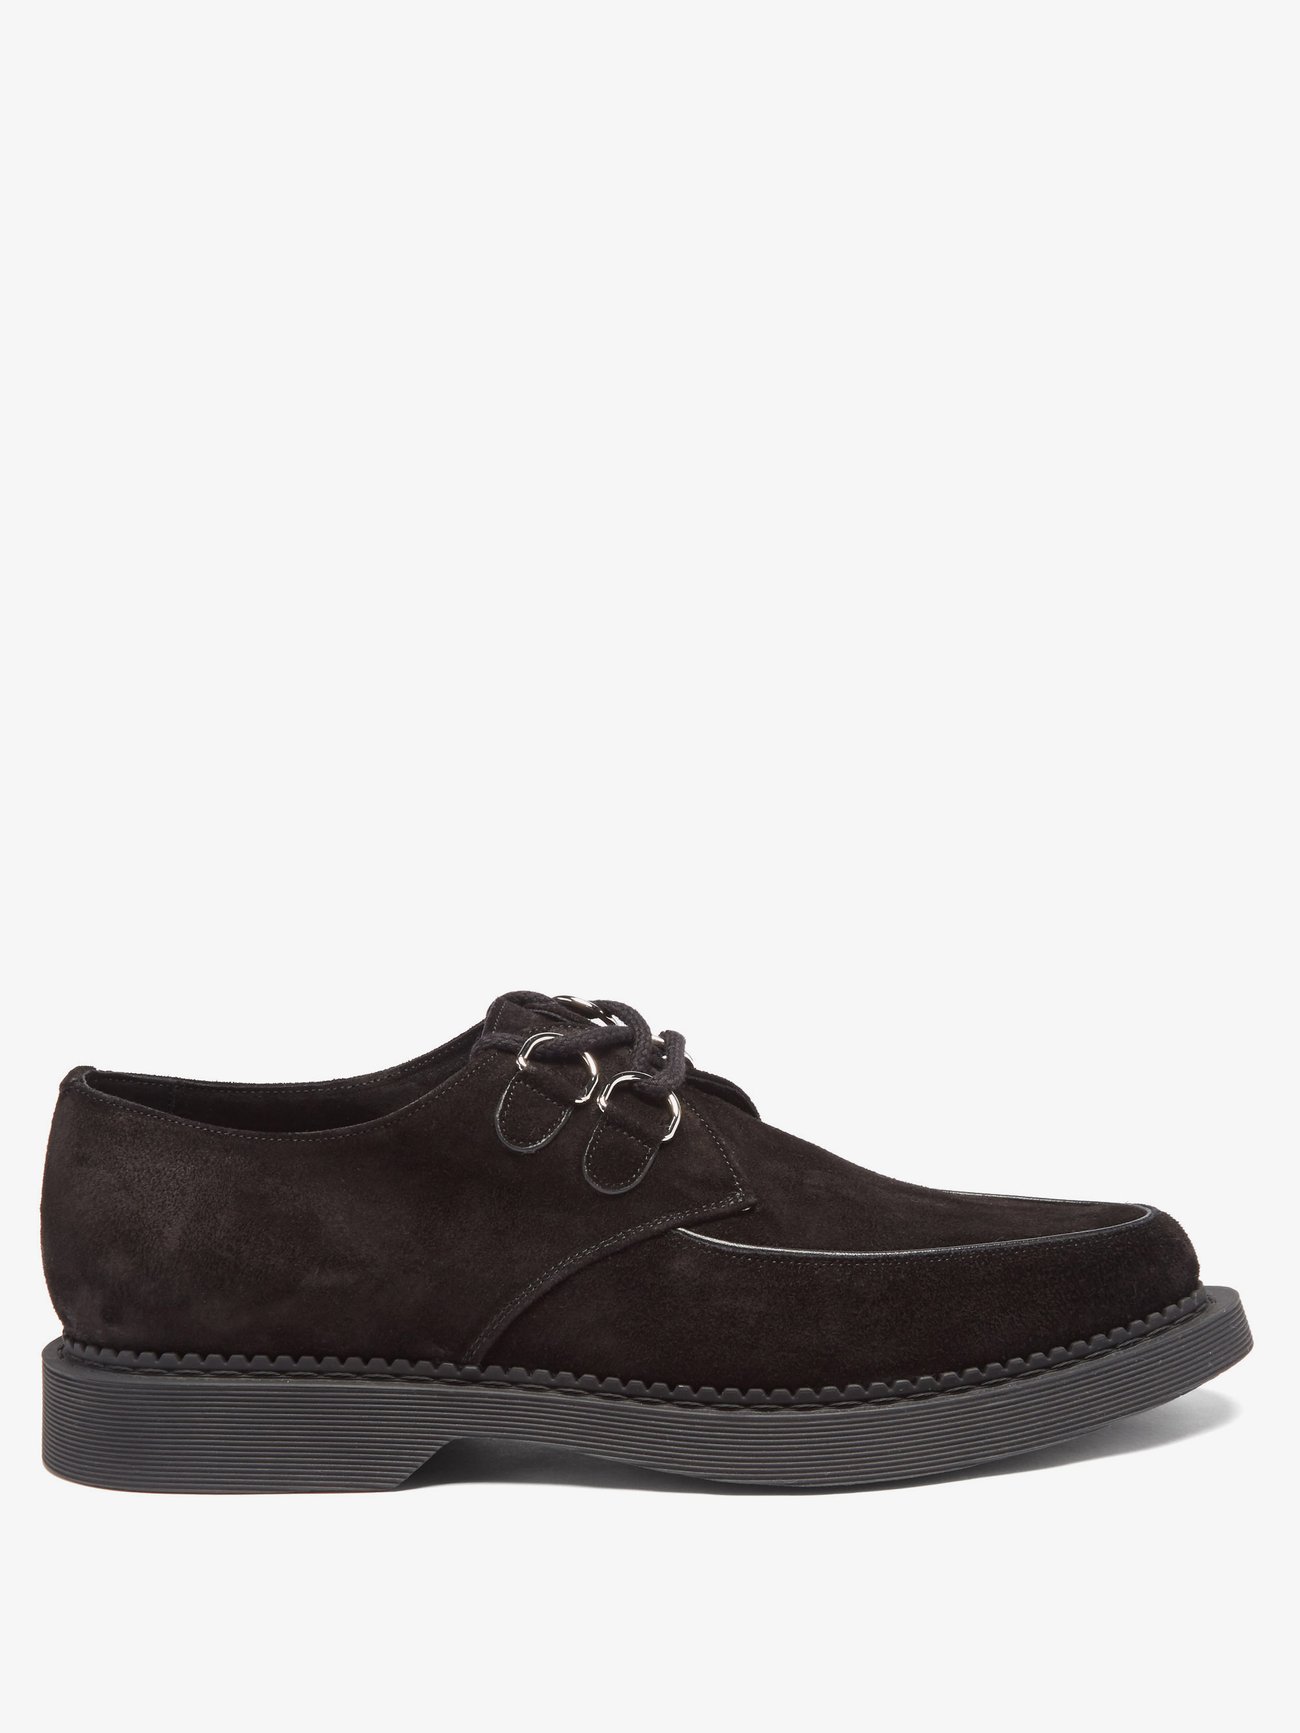 Anthony suede Derby shoes video